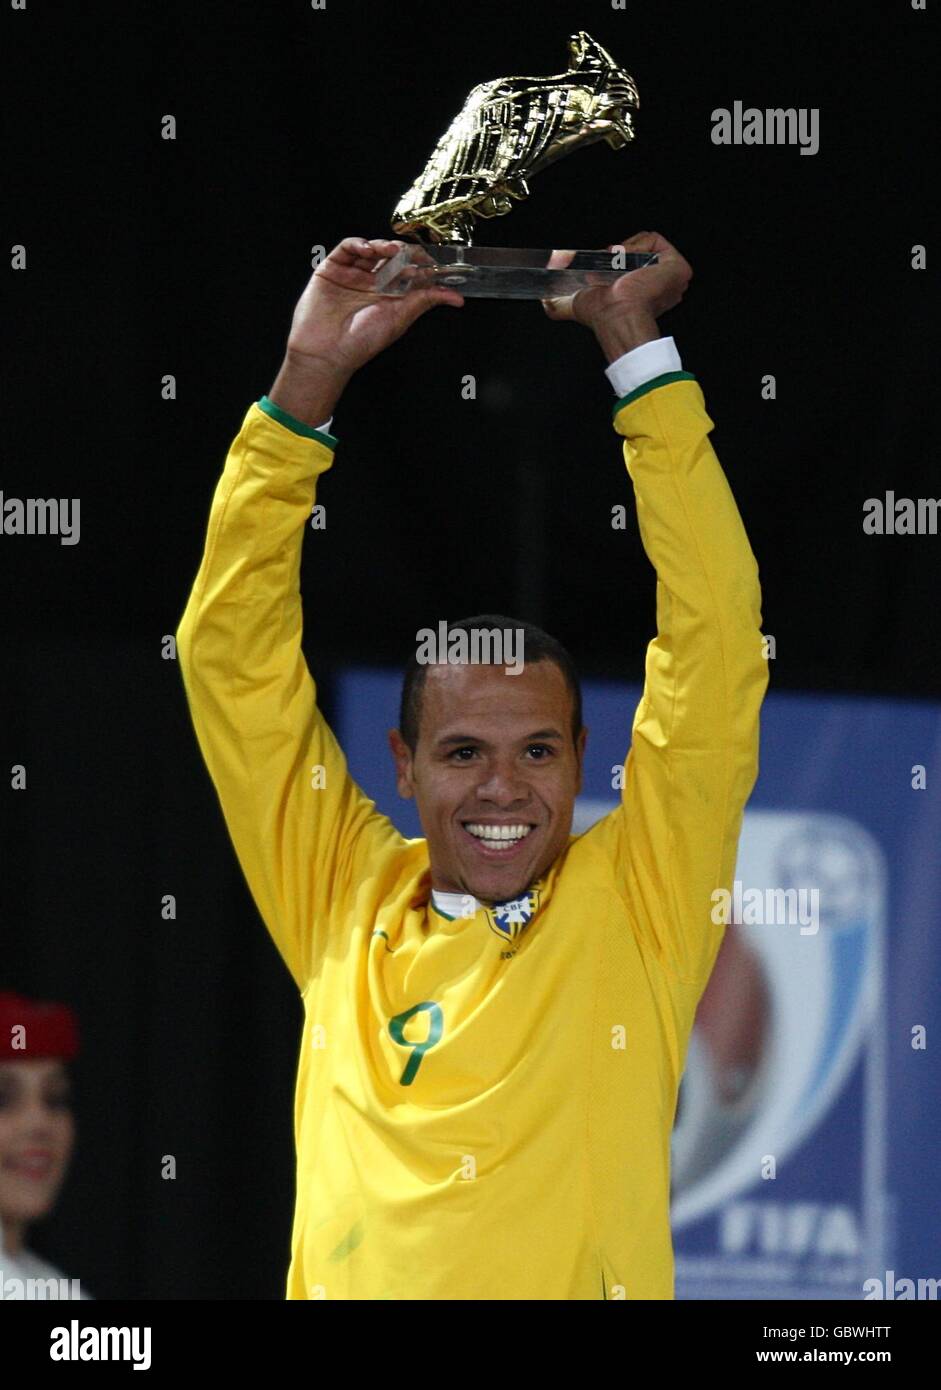 Soccer - 2009 FIFA Confederations Cup - Final - USA v Brazil - Ellis Park. Brazil's Luis Fabiano celebrates with the golden boot after the Confederations Cup Final Stock Photo